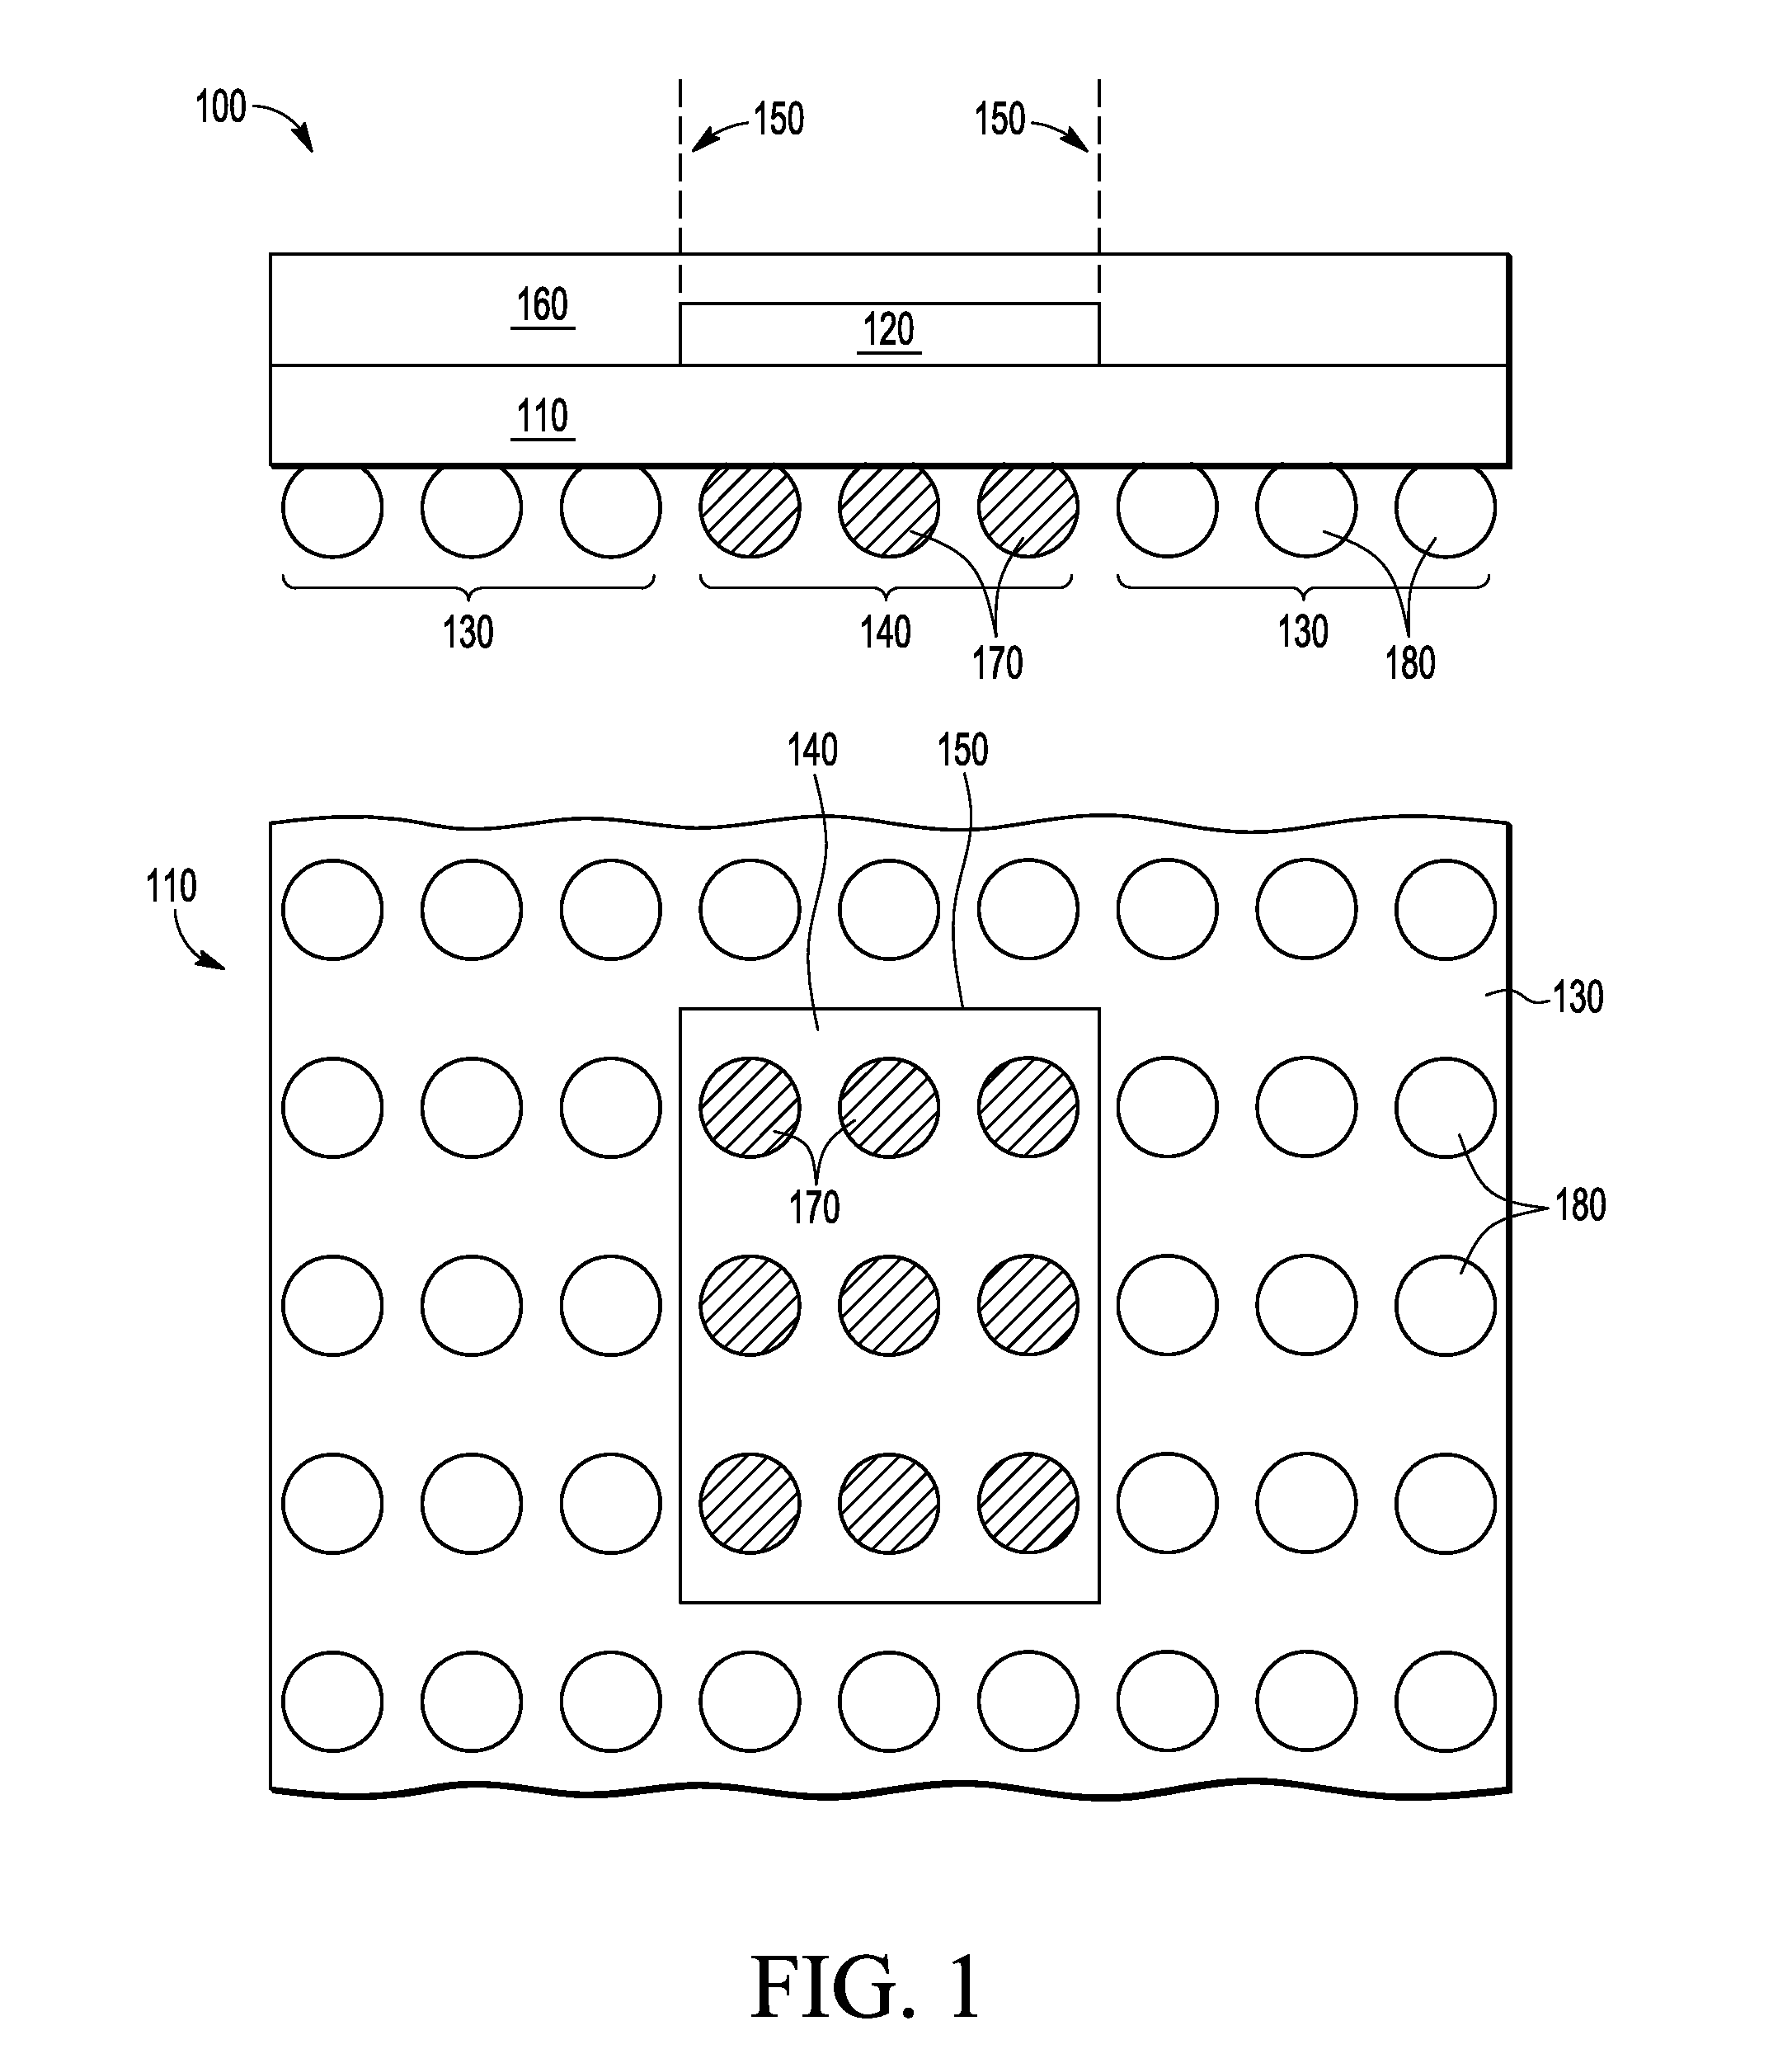 Package substrate with improved reliability